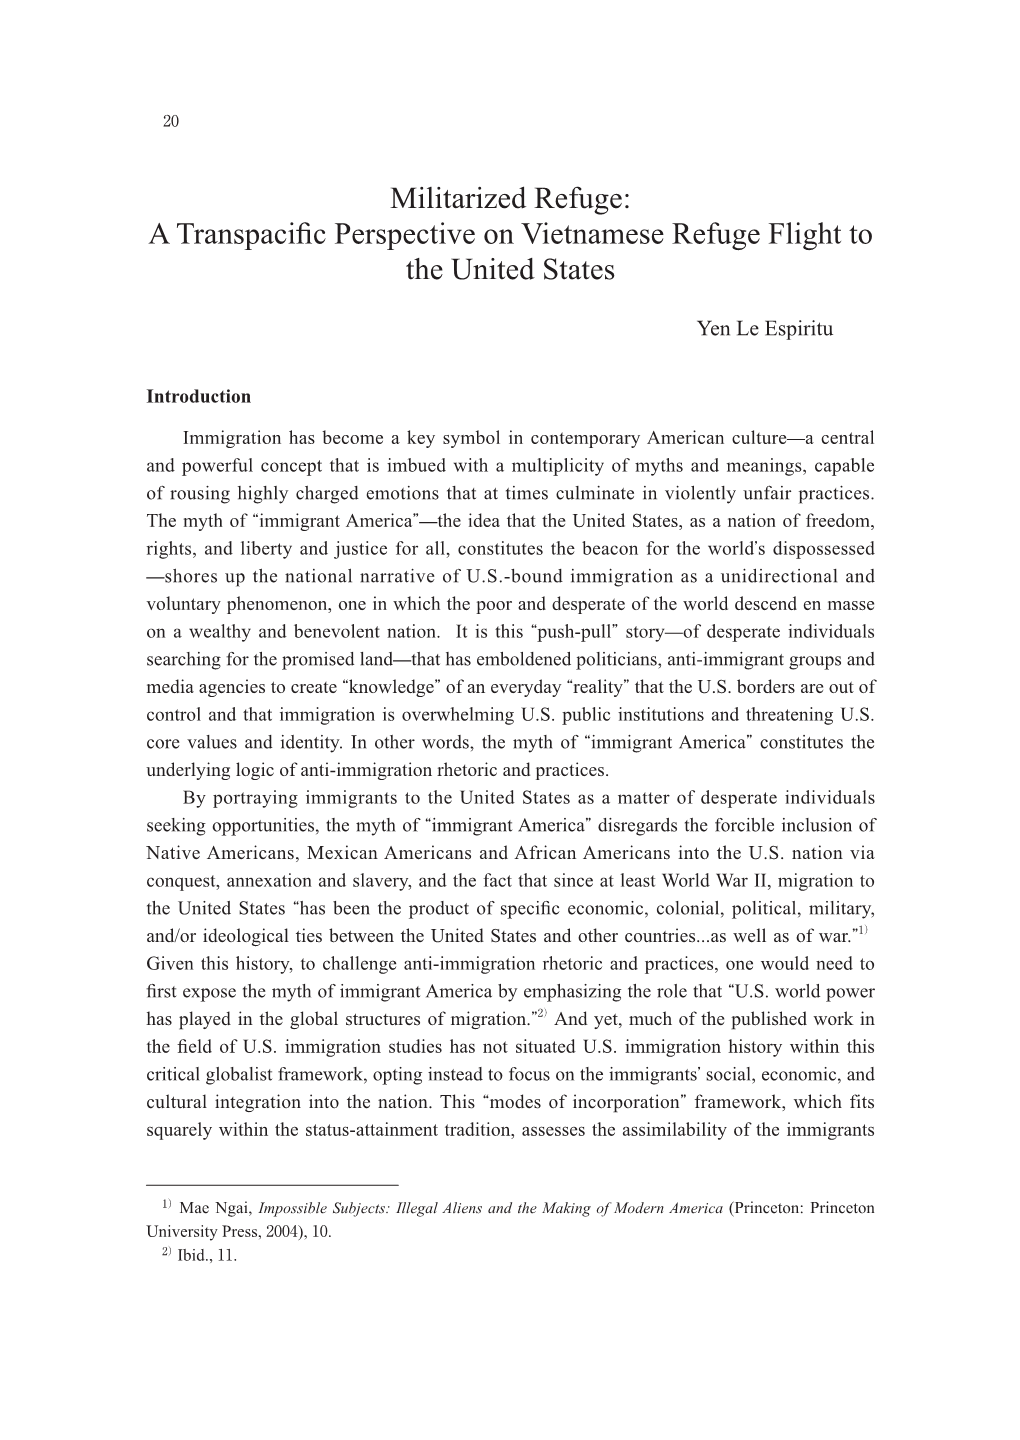 A Transpacific Perspective on Vietnamese Refuge Flight to The